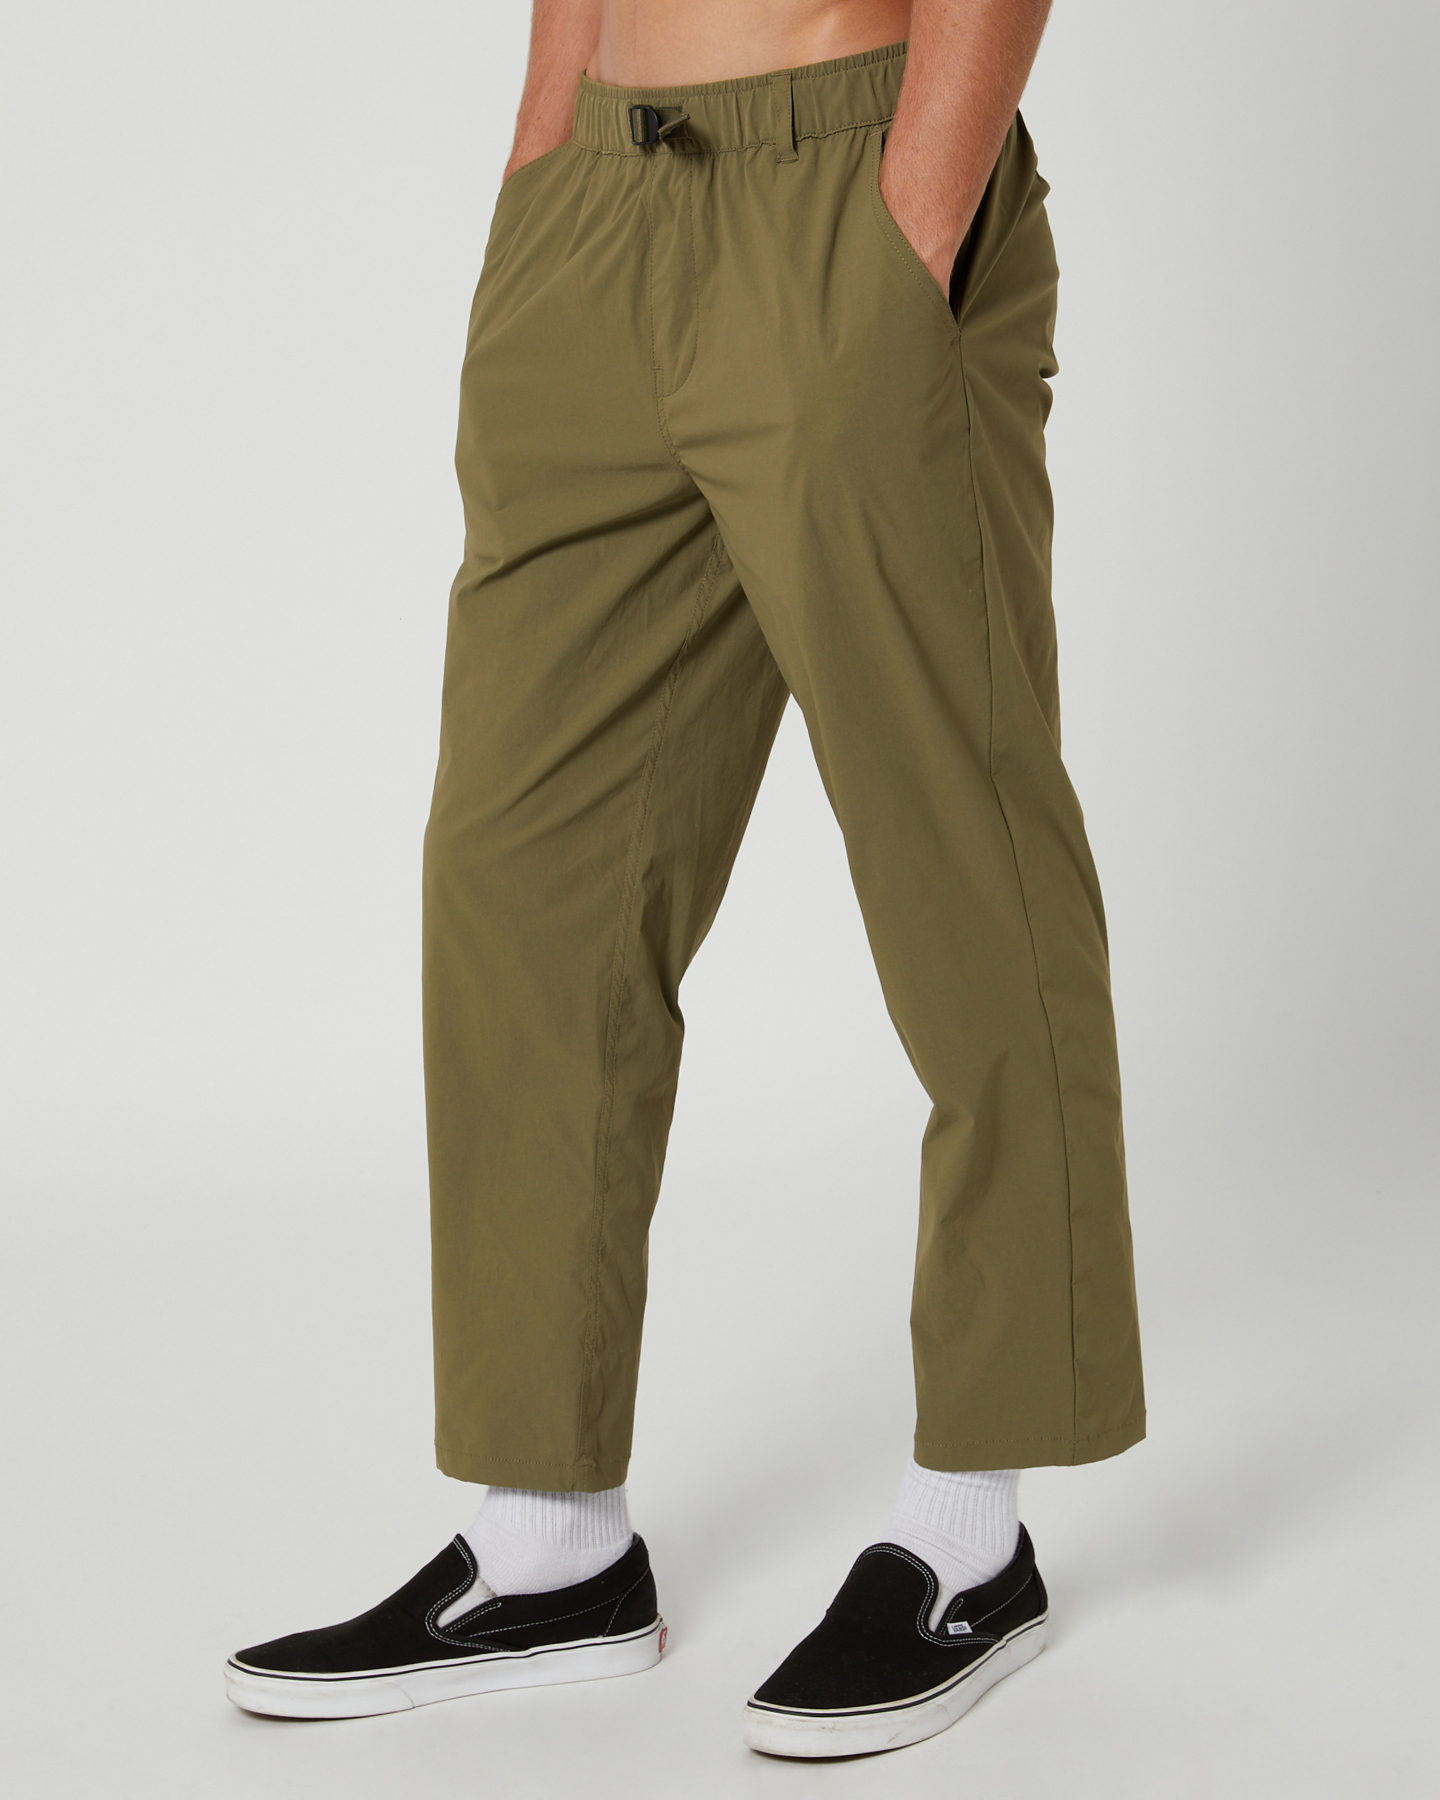 Brixton Steady Cinch Taper X Pant - Military Olive | SurfStitch